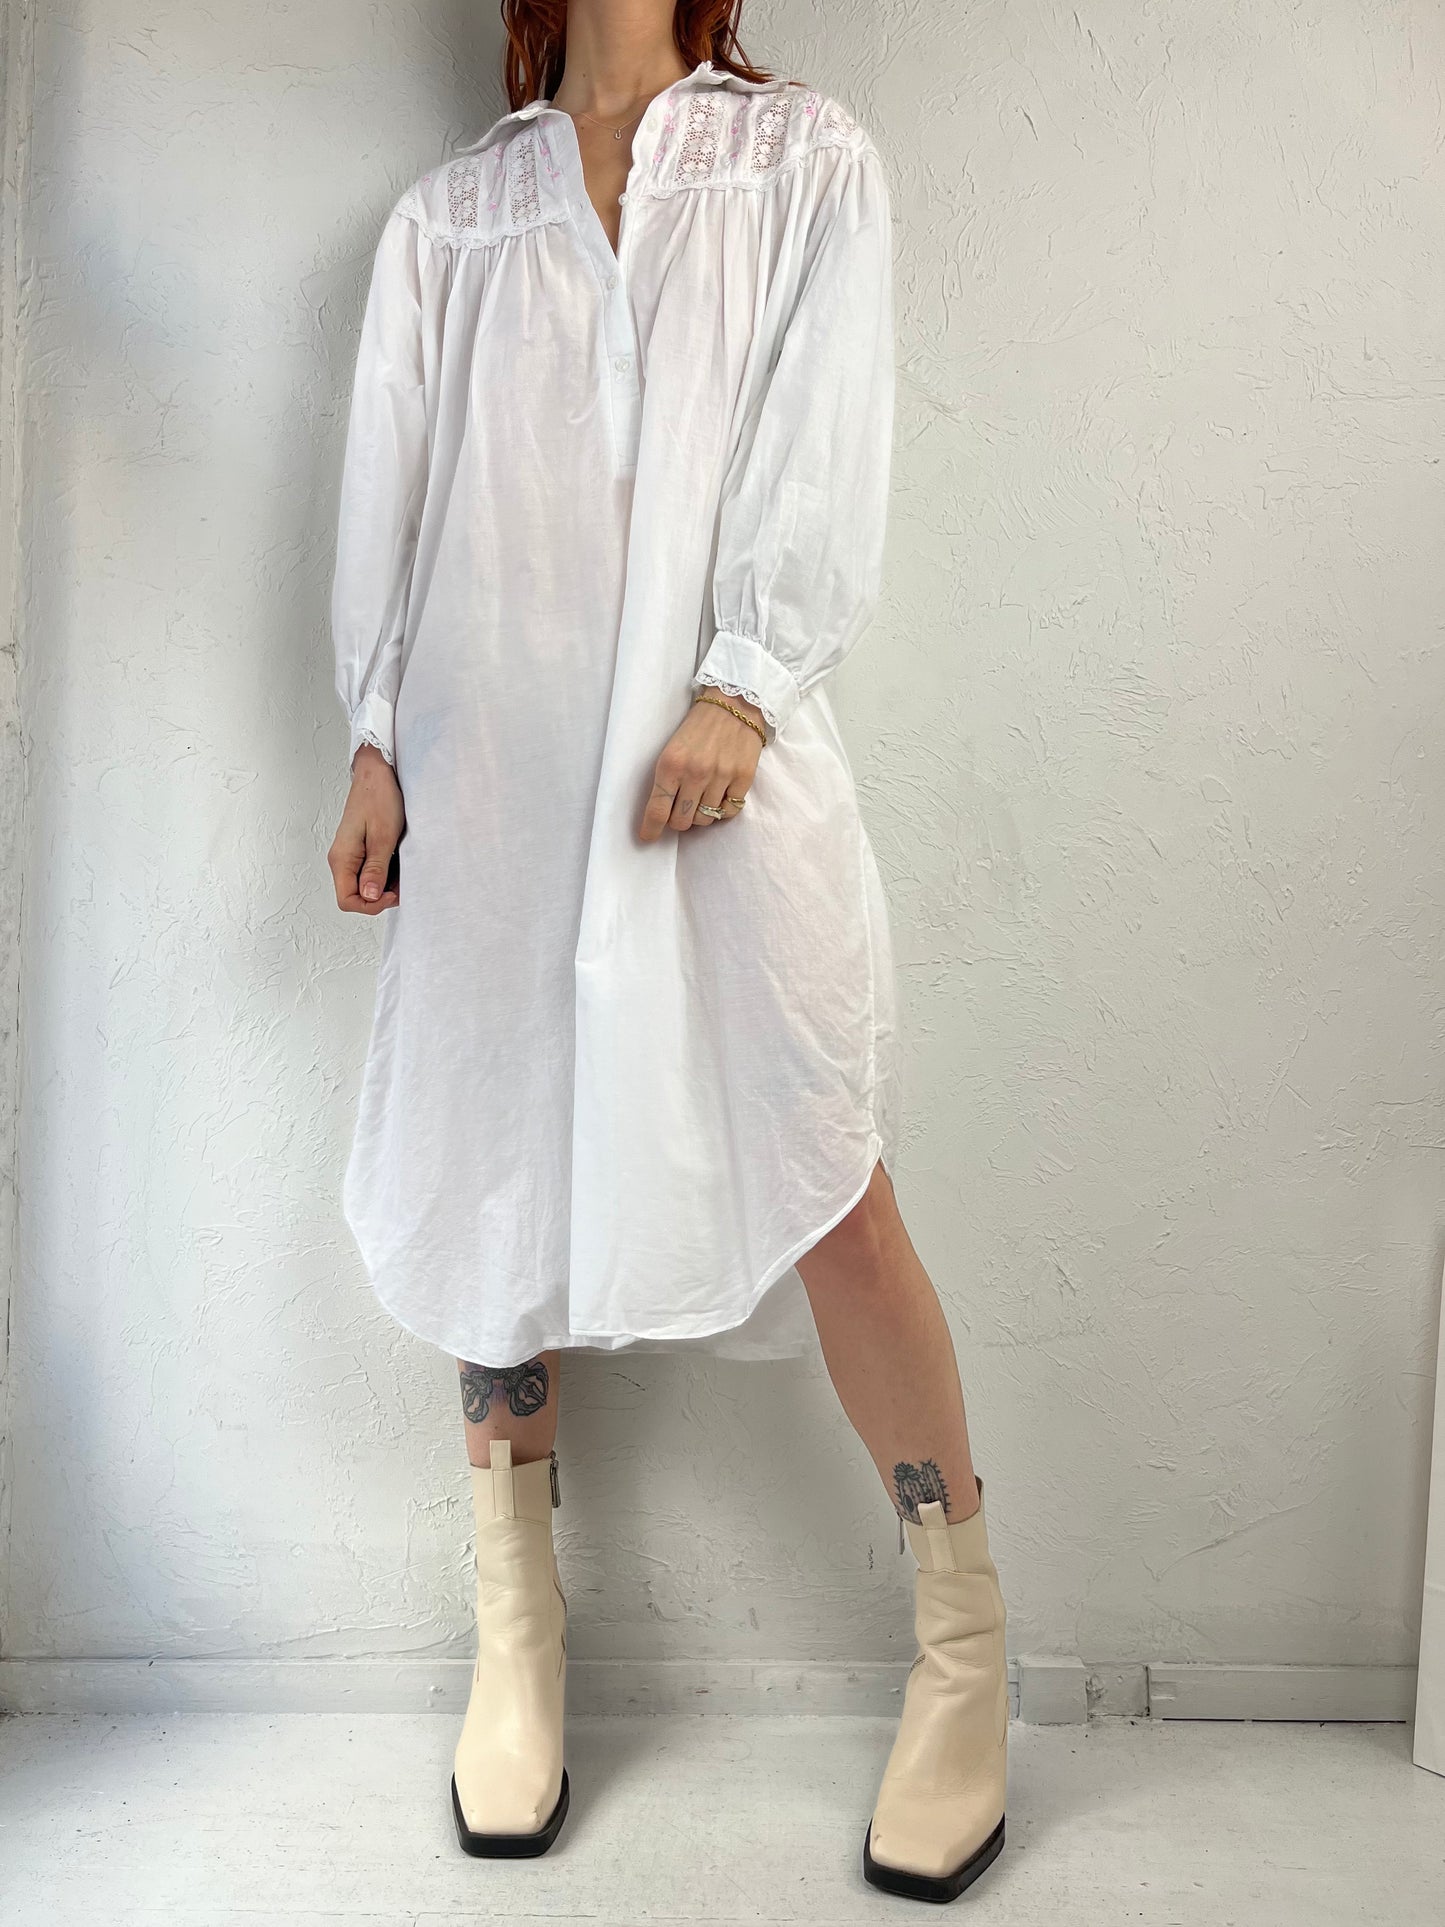 90s 'Nicole' White Cotton Embroidered Long Sleeve Night Dress / Small